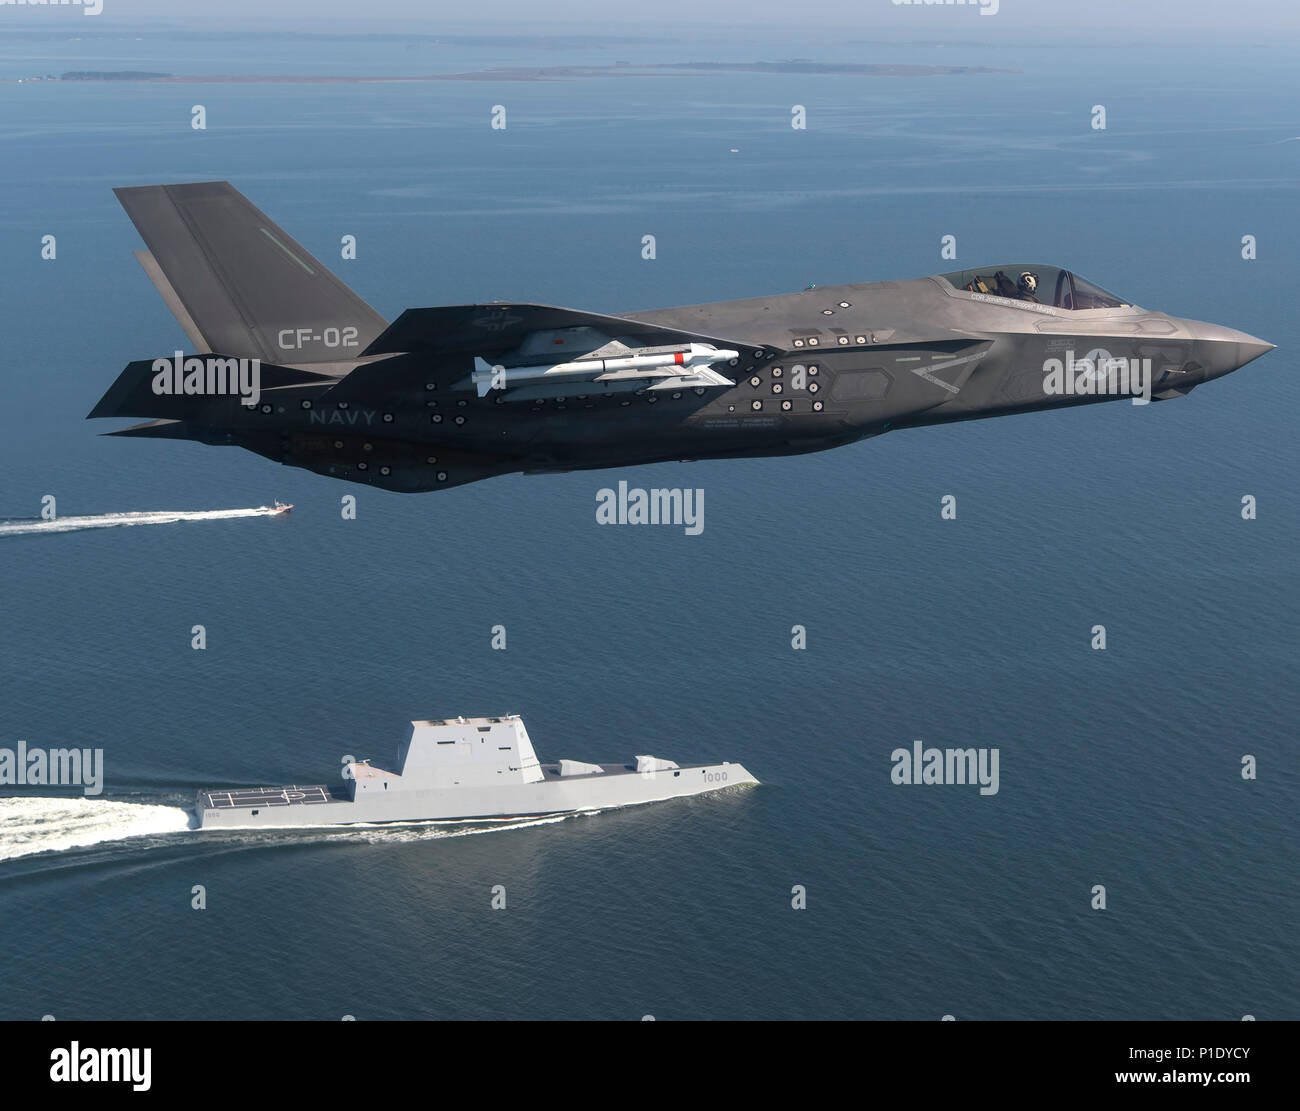 An F-35 Lightning II Carrier Variant (CV) piloted by U.S. Marine Corps Maj. Robert 'Champ' Guyette II, a test pilot from the F-35 Pax River Integrated Test Force (ITF) assigned to the Salty Dogs of Air Test and Evaluation Squadron (VX) 23, flies over the stealth guided-missile destroyer USS Zumwalt (DDG 1000) as the ship transits the Chesapeake Bay on Oct. 17, 2016. USS Zumwalt, the Navy's newest and most technologically advanced surface ship, joined the fleet Oct. 15. The F-35C Lightning II — a next generation single-seat, single-engine strike fighter that incorporates stealth technologies, d Stock Photo